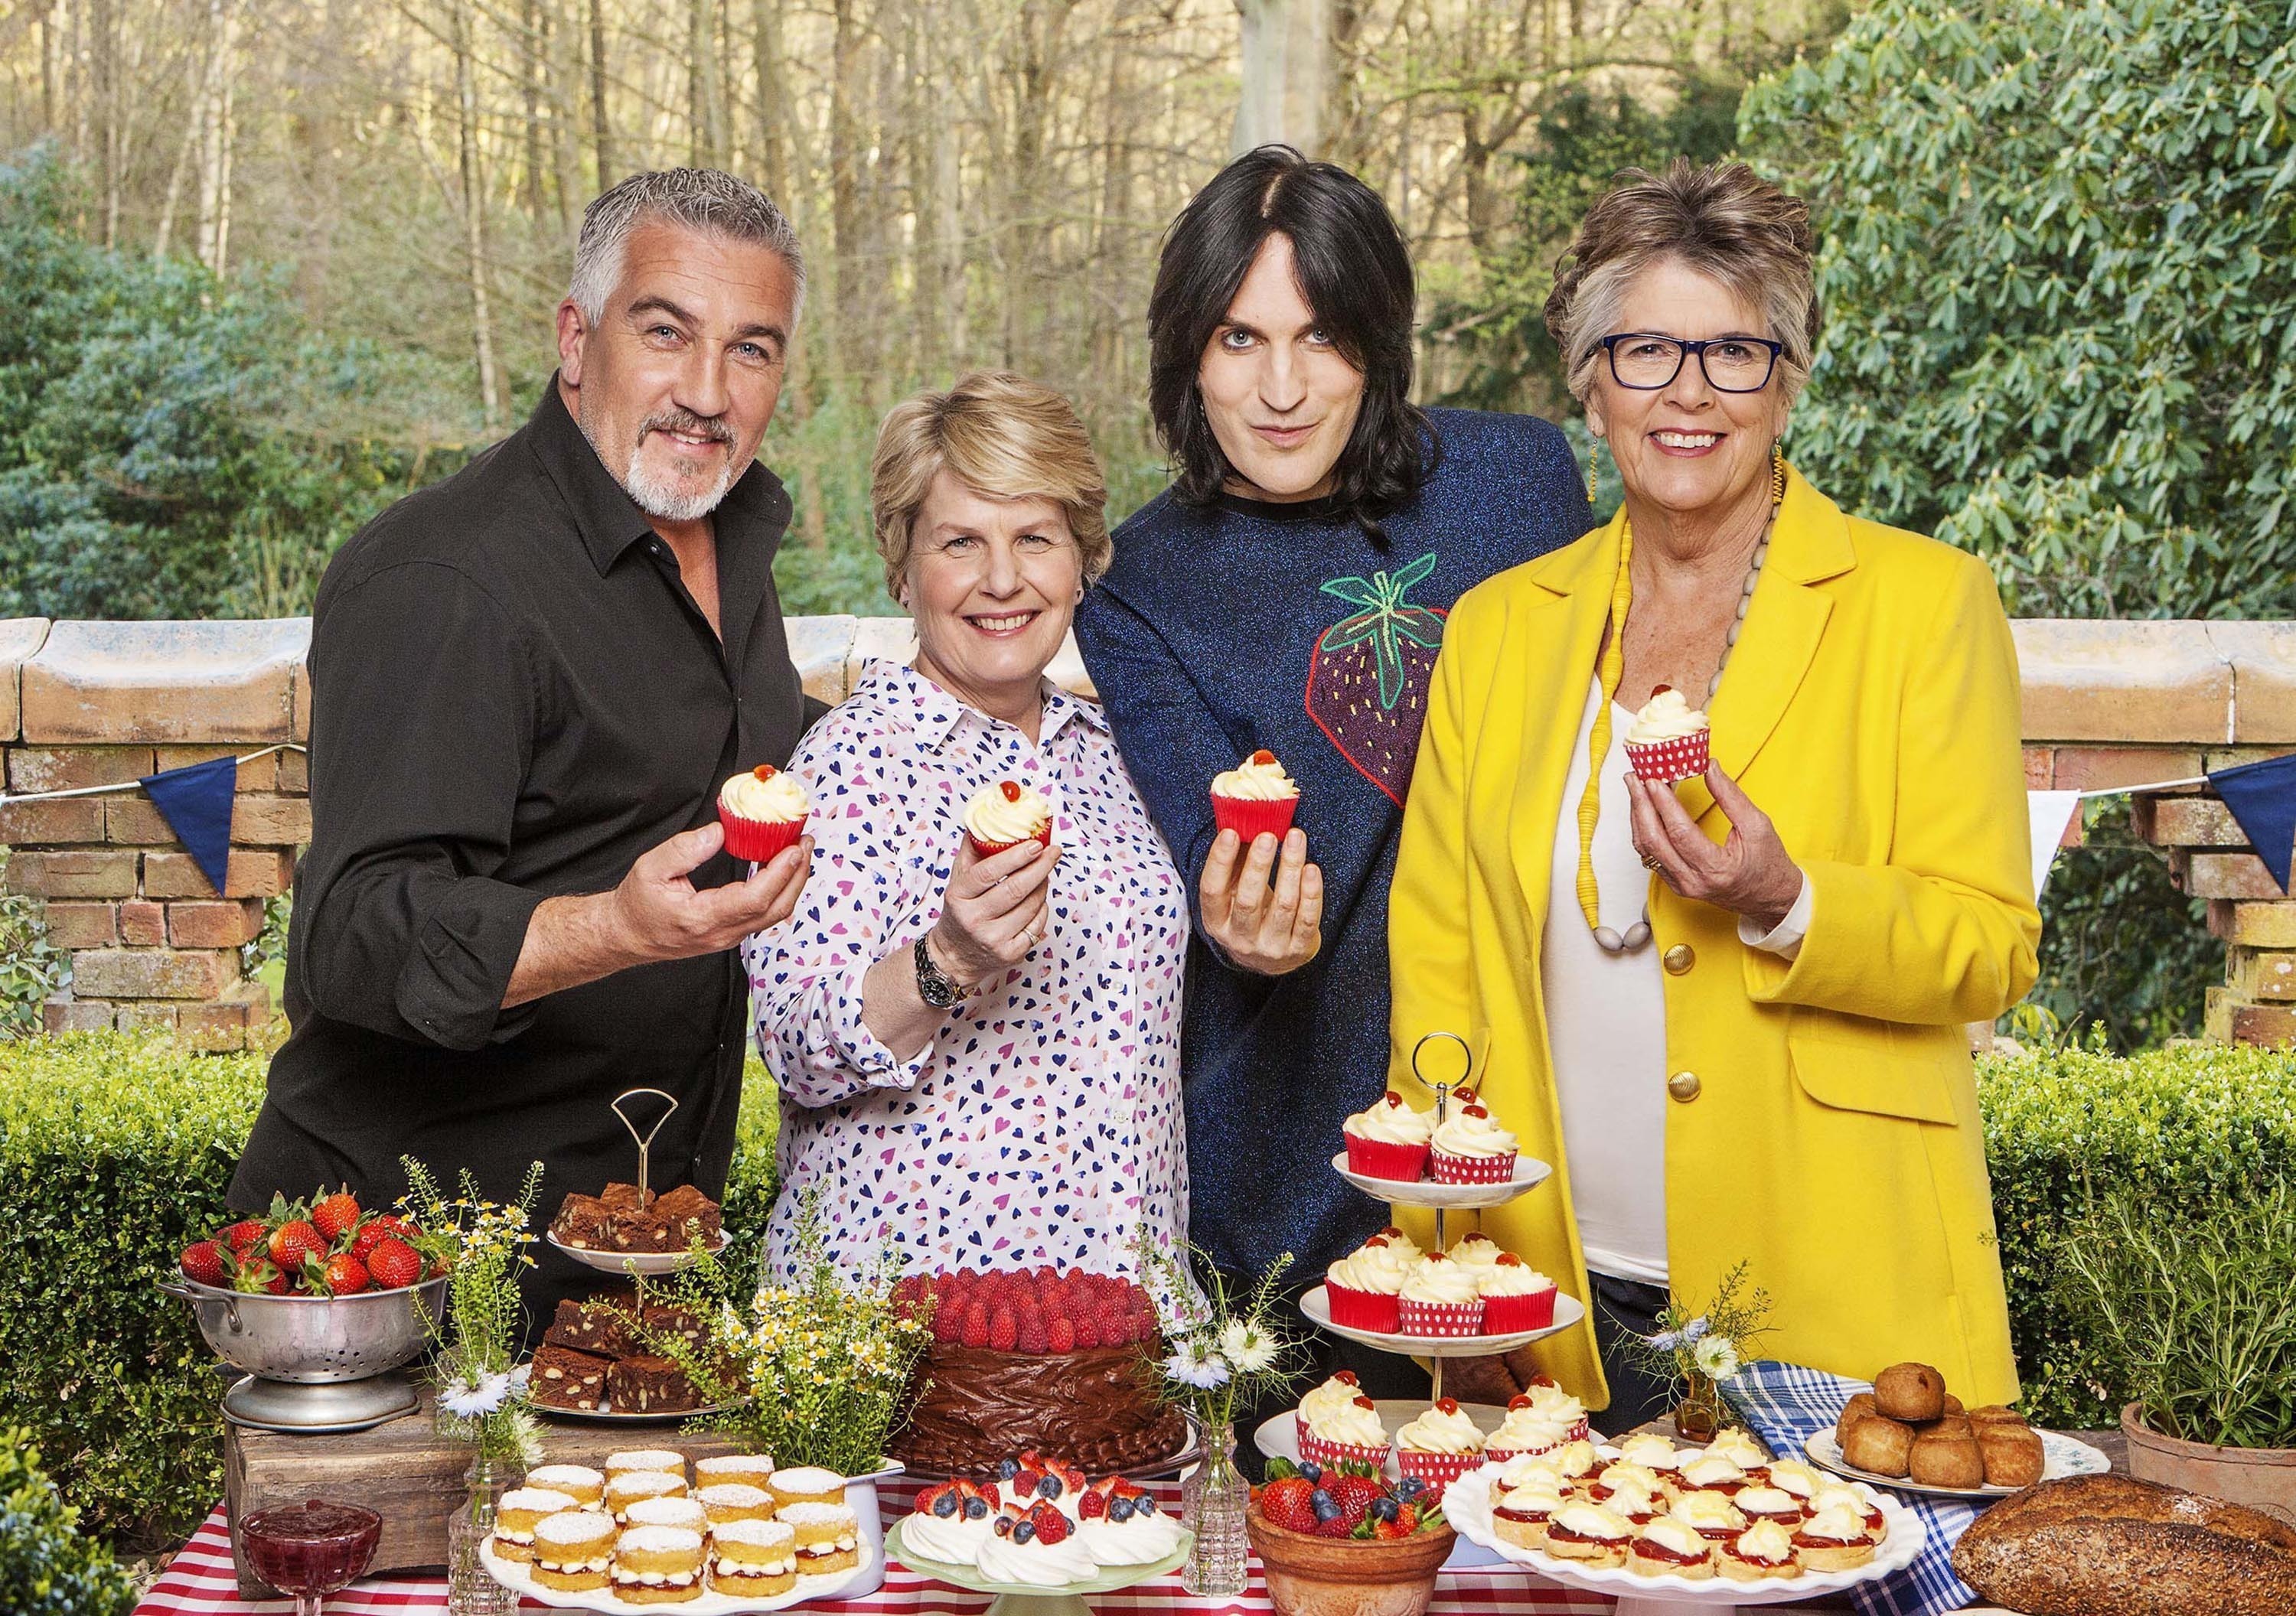 The judges and presenters for The Great British Bake Off (left to right) Paul Hollywood, Sandi Toksvig, Noel Fielding and Prue Leith (Love Productions/Channel 4/Mark Bourdillon/PA Wire)